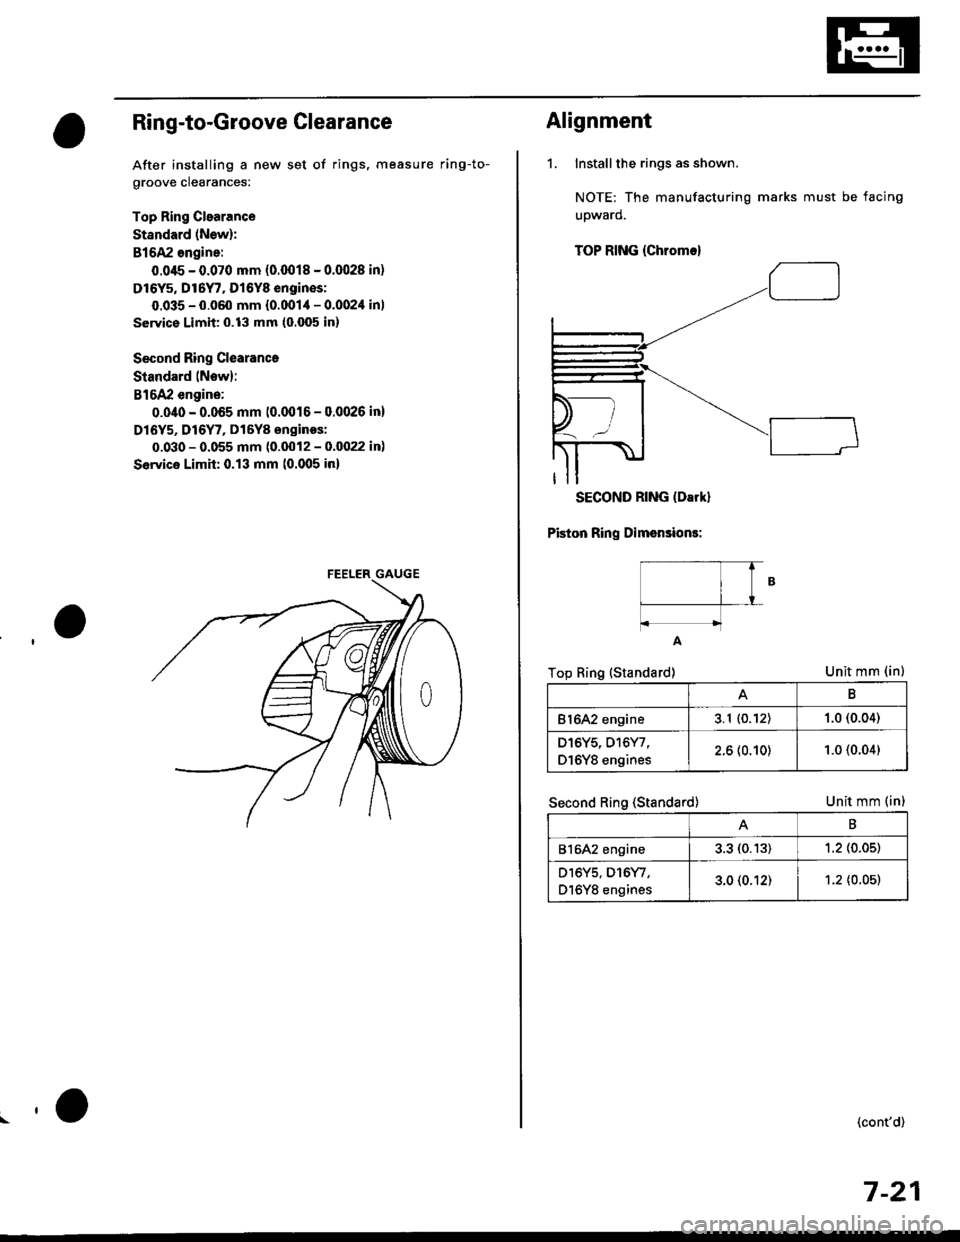 HONDA CIVIC 1996 6.G Service Manual Ring-to-Groove Clearance
After installing a new set of rings, measure ring-to-
groove clearances:
Top Ring Clearance
Standard (New):
B16A2 angine:
0.045 - 0.070 mm (0.0018 - 0.(X128 in)
Dl6Y5, Dt6Y7, 